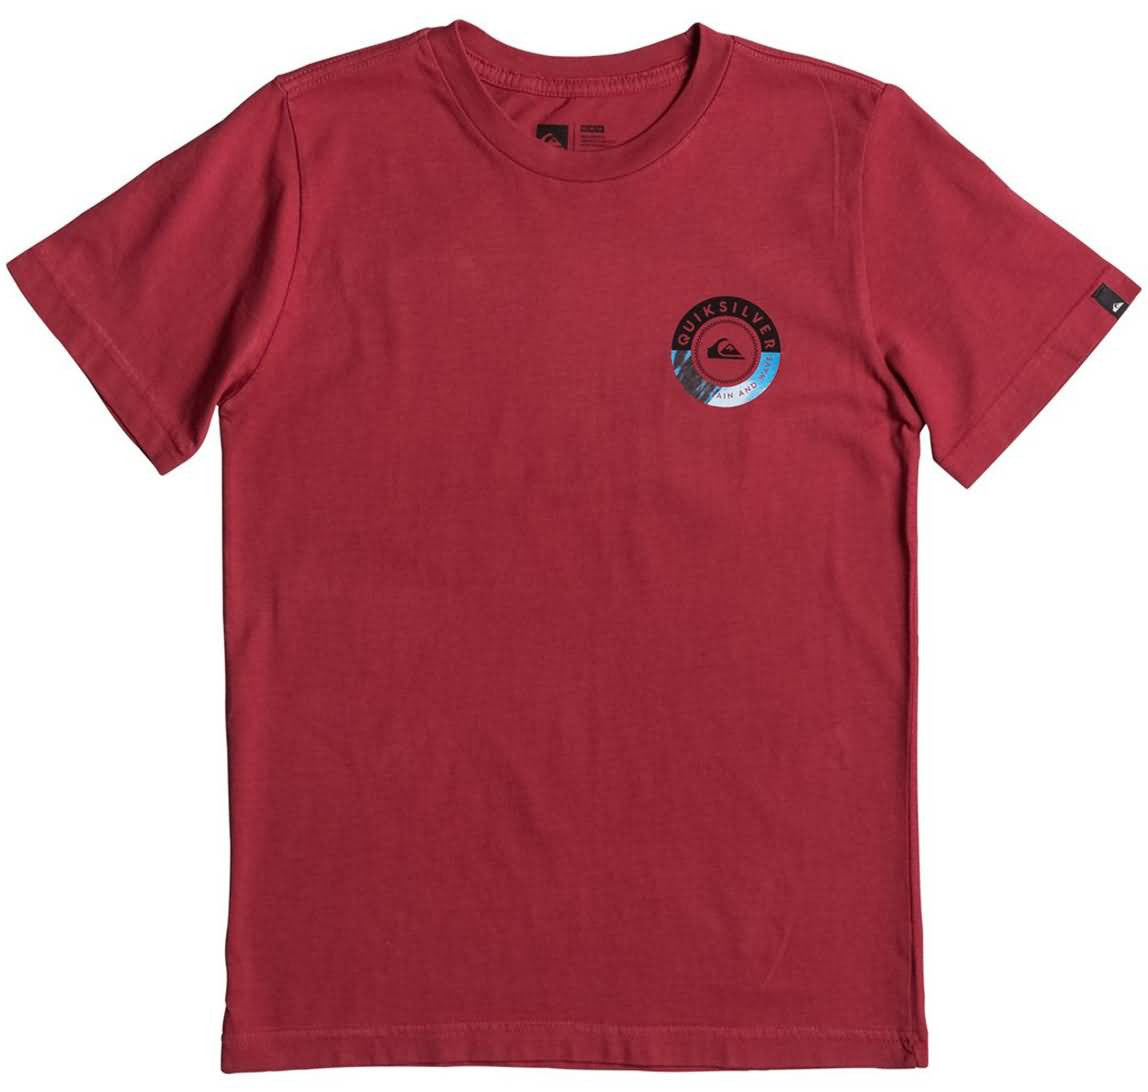 Quiksilver Summer 2017 Apparel | Youth Boys Lifestyle Tees